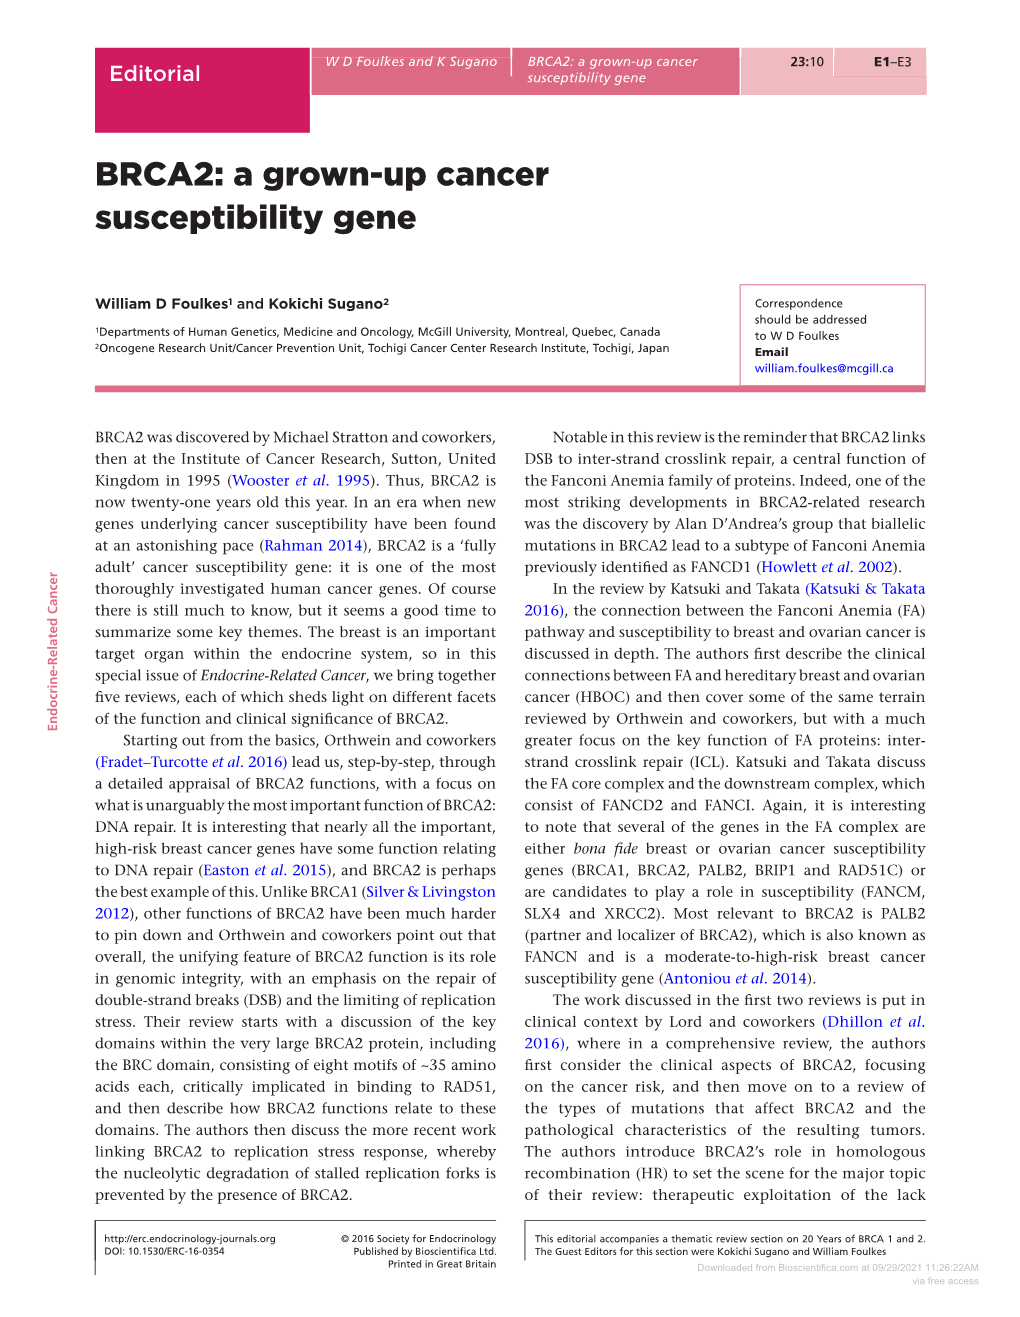 BRCA2: a Grown-Up Cancer Susceptibility Gene